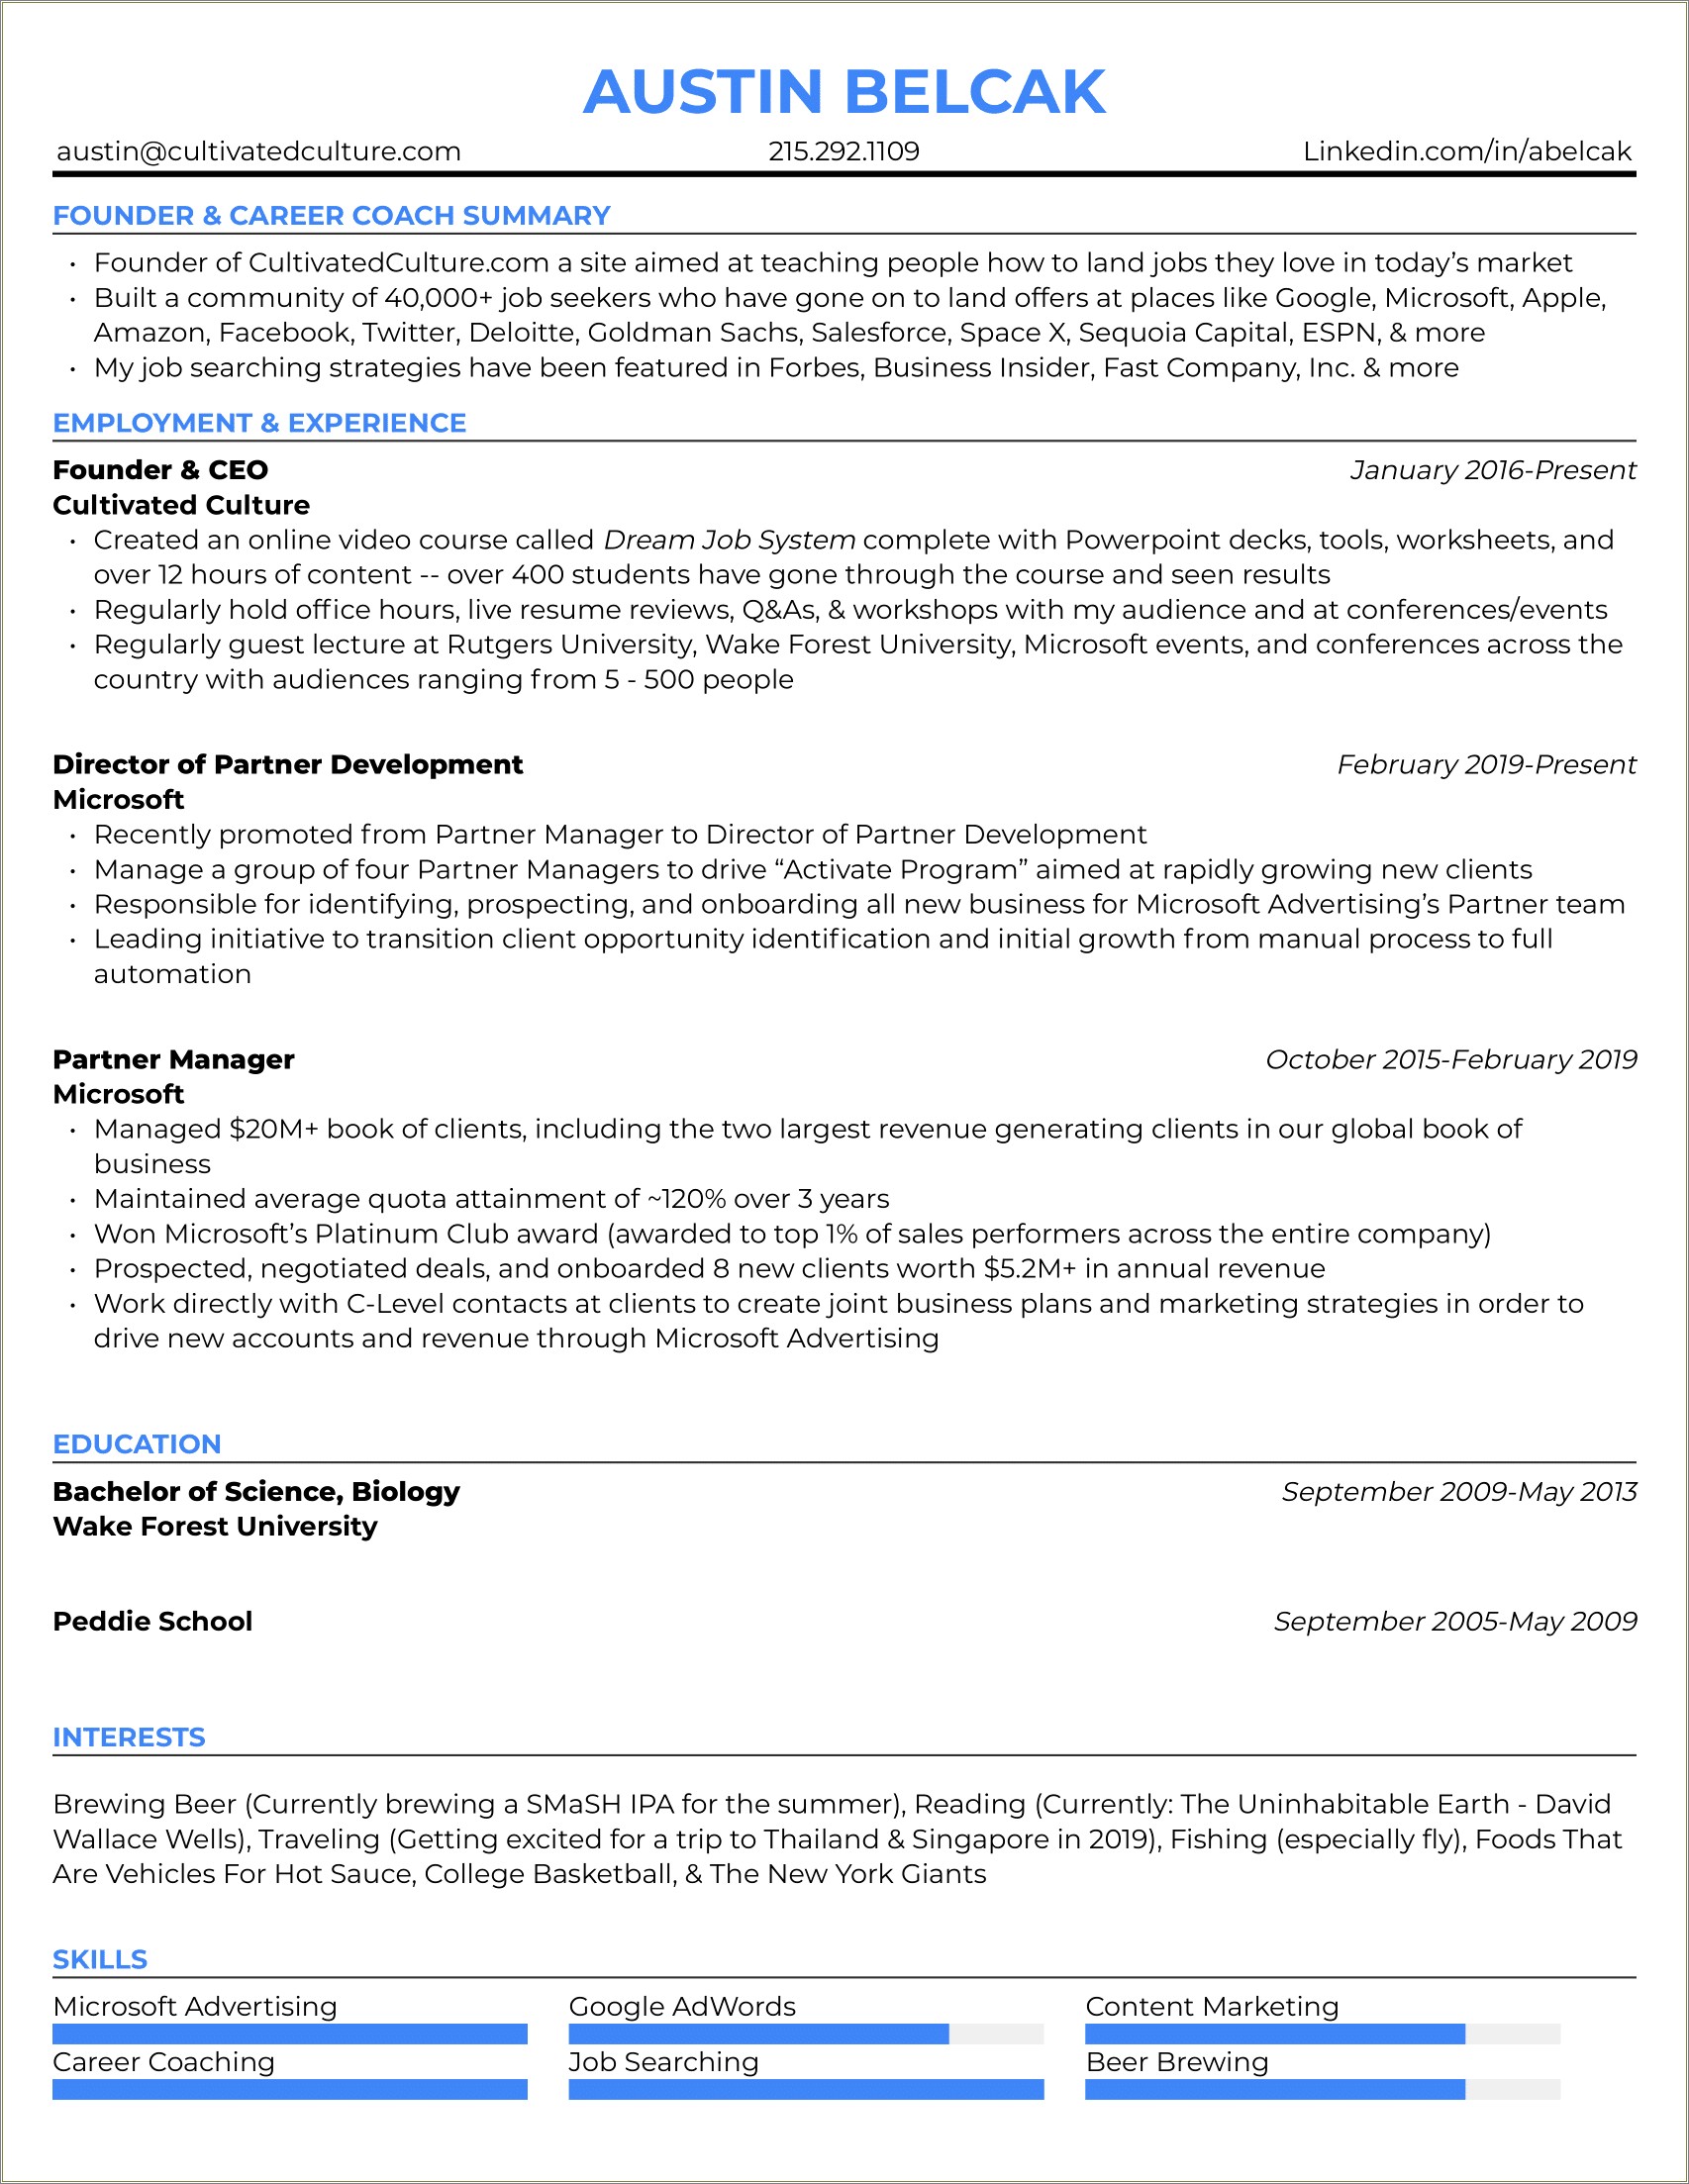 White Font On Resumes For Key Words